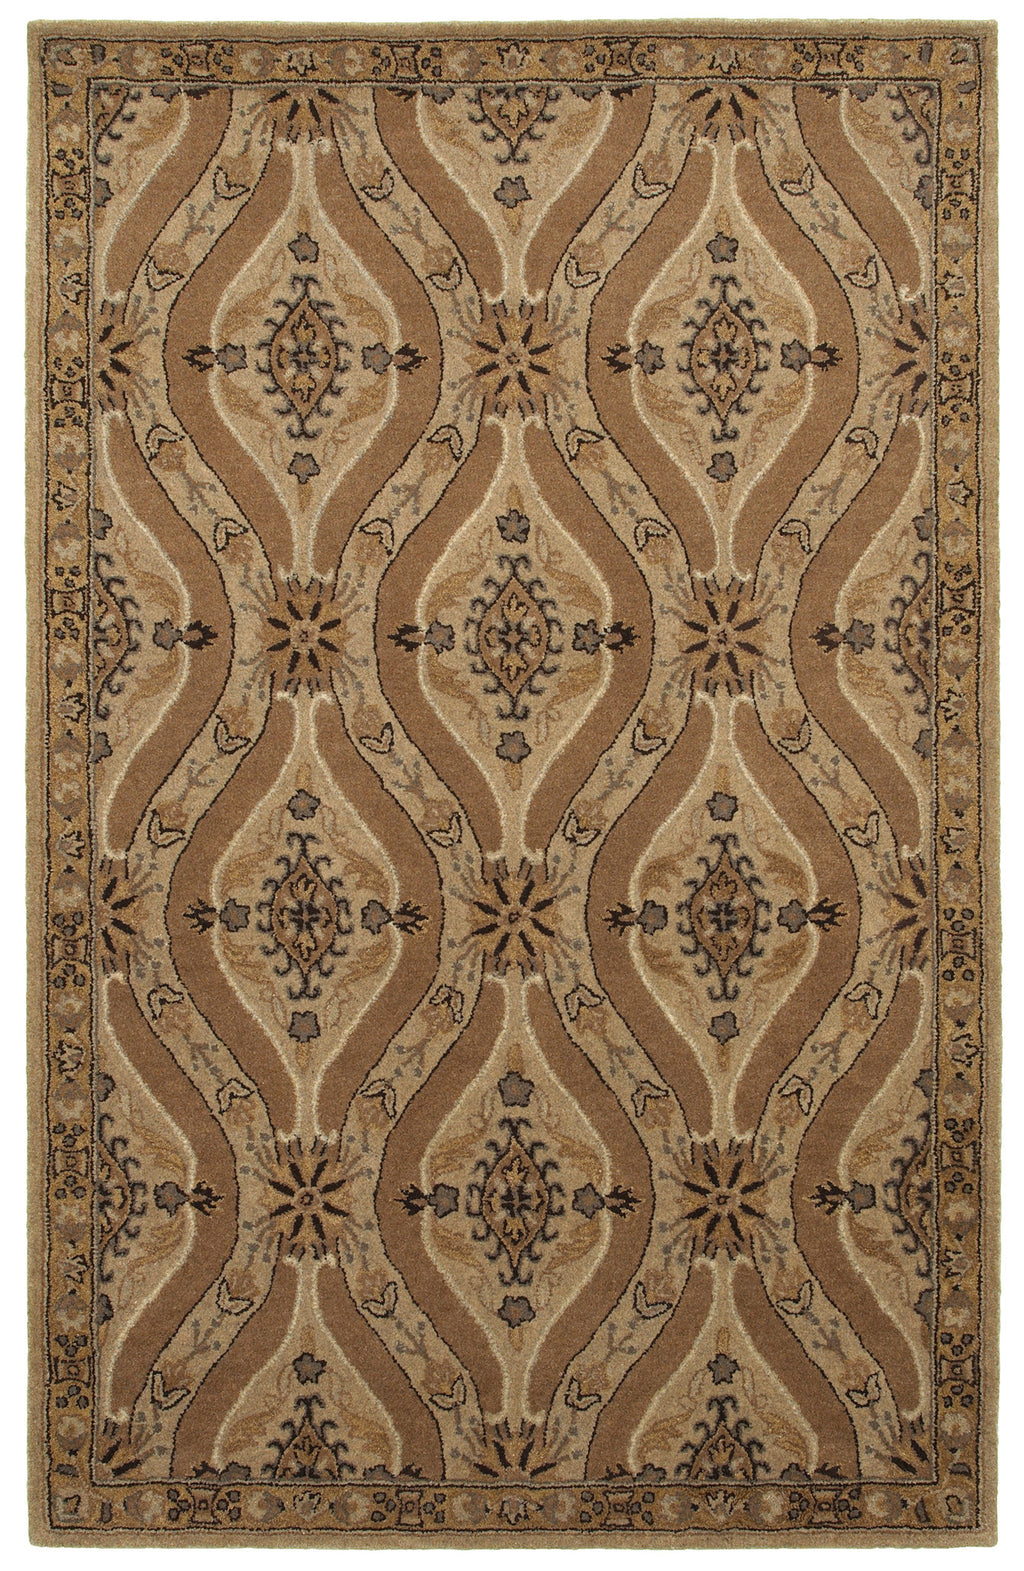 LR Resources Allure 03832 Oatmeal Hand Woven Area Rug 5' x 7' 9''